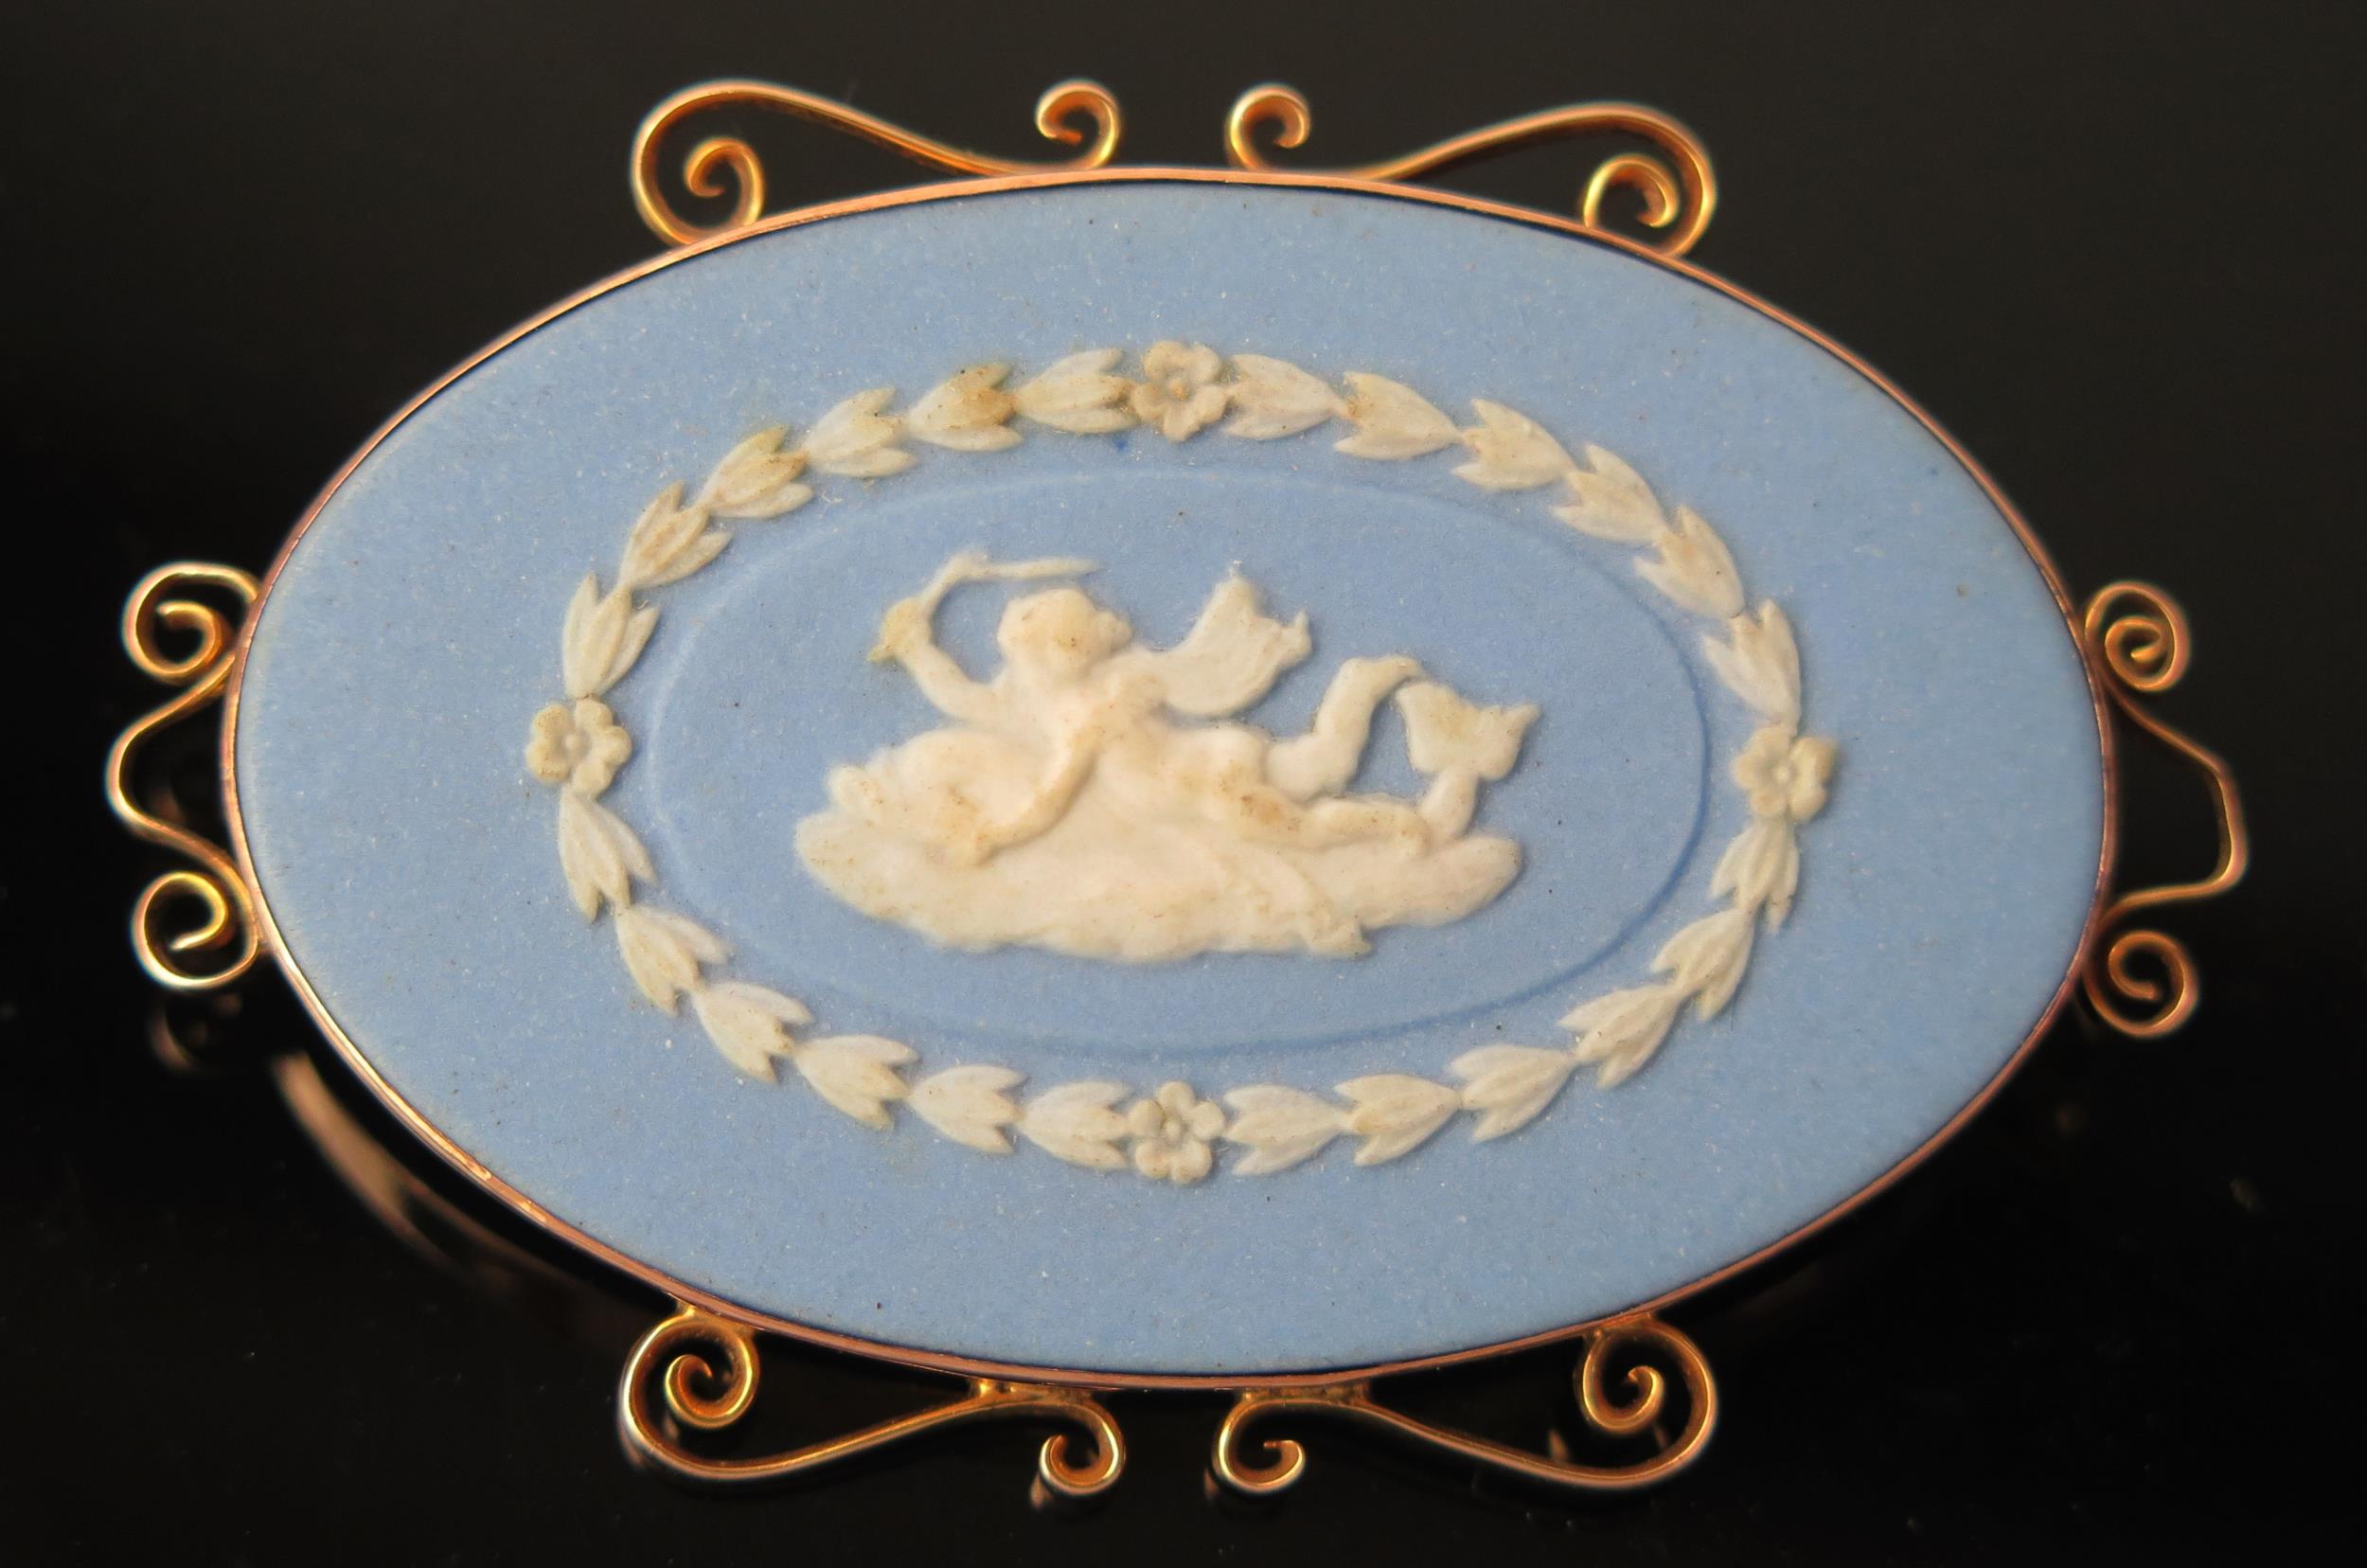 A mid 20th Century Wedgwood plaque brooch, in a 9ct gold mount. 4.5cm wide